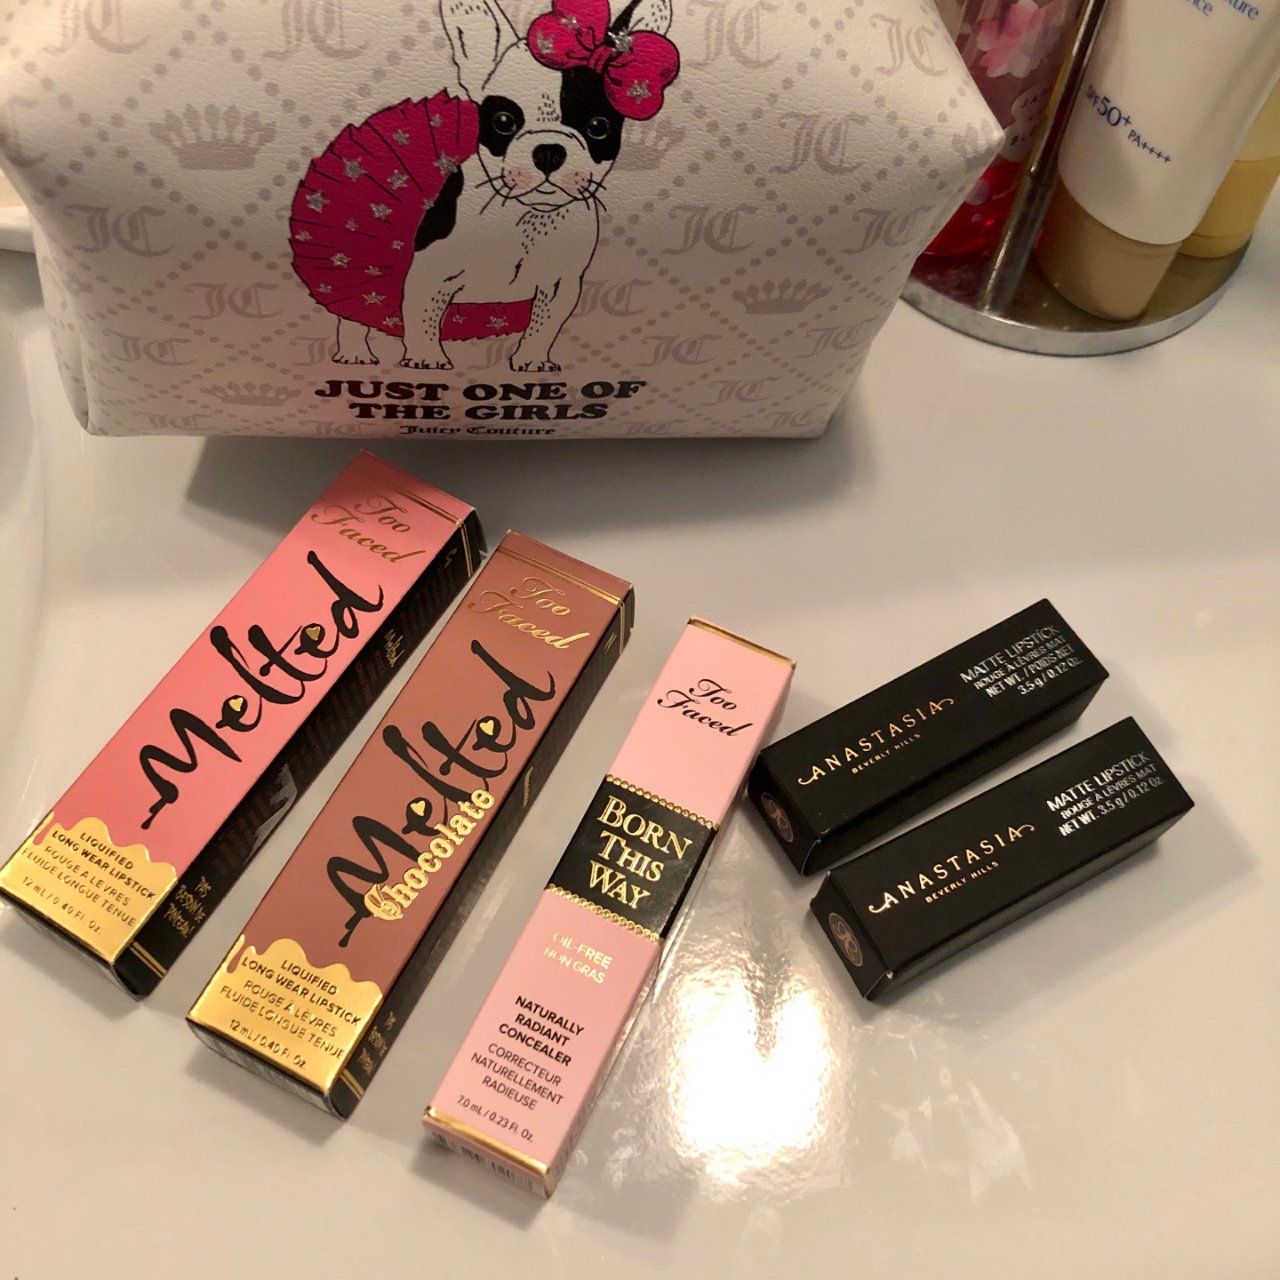 Too Faced,Anastasia Beverly Hills